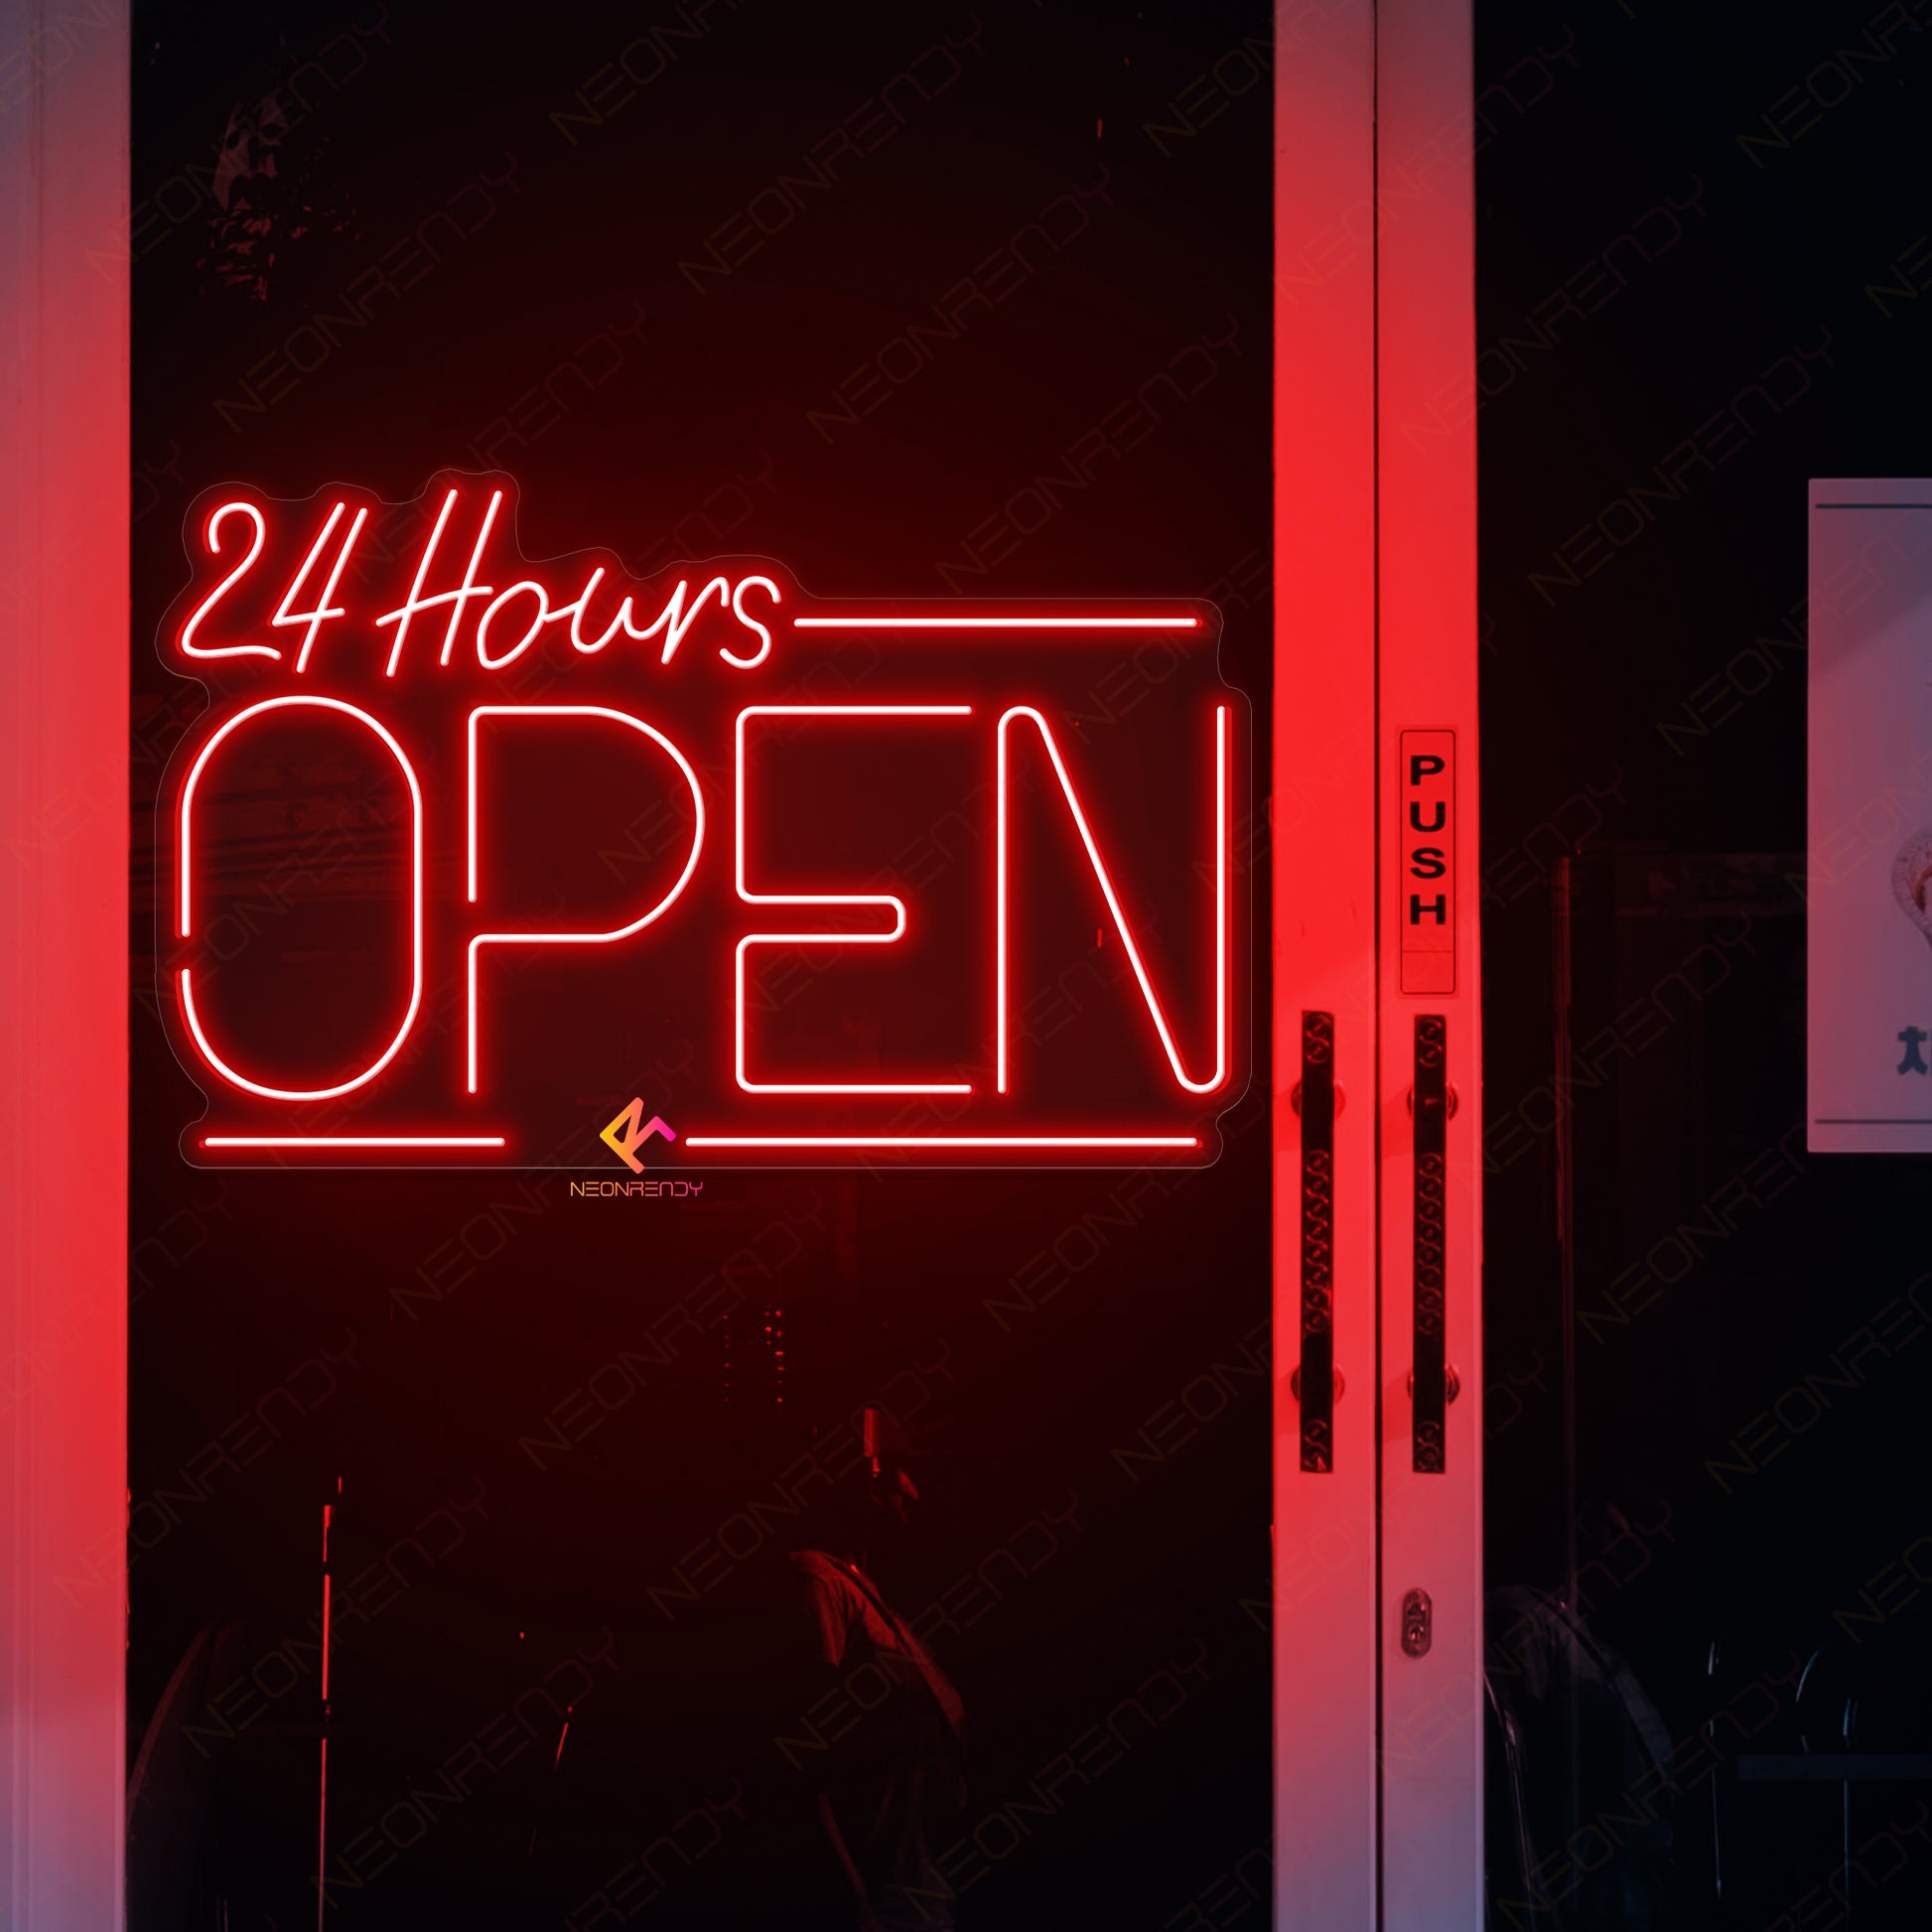 Neon Open 24 Hours Sign Open Led Light red